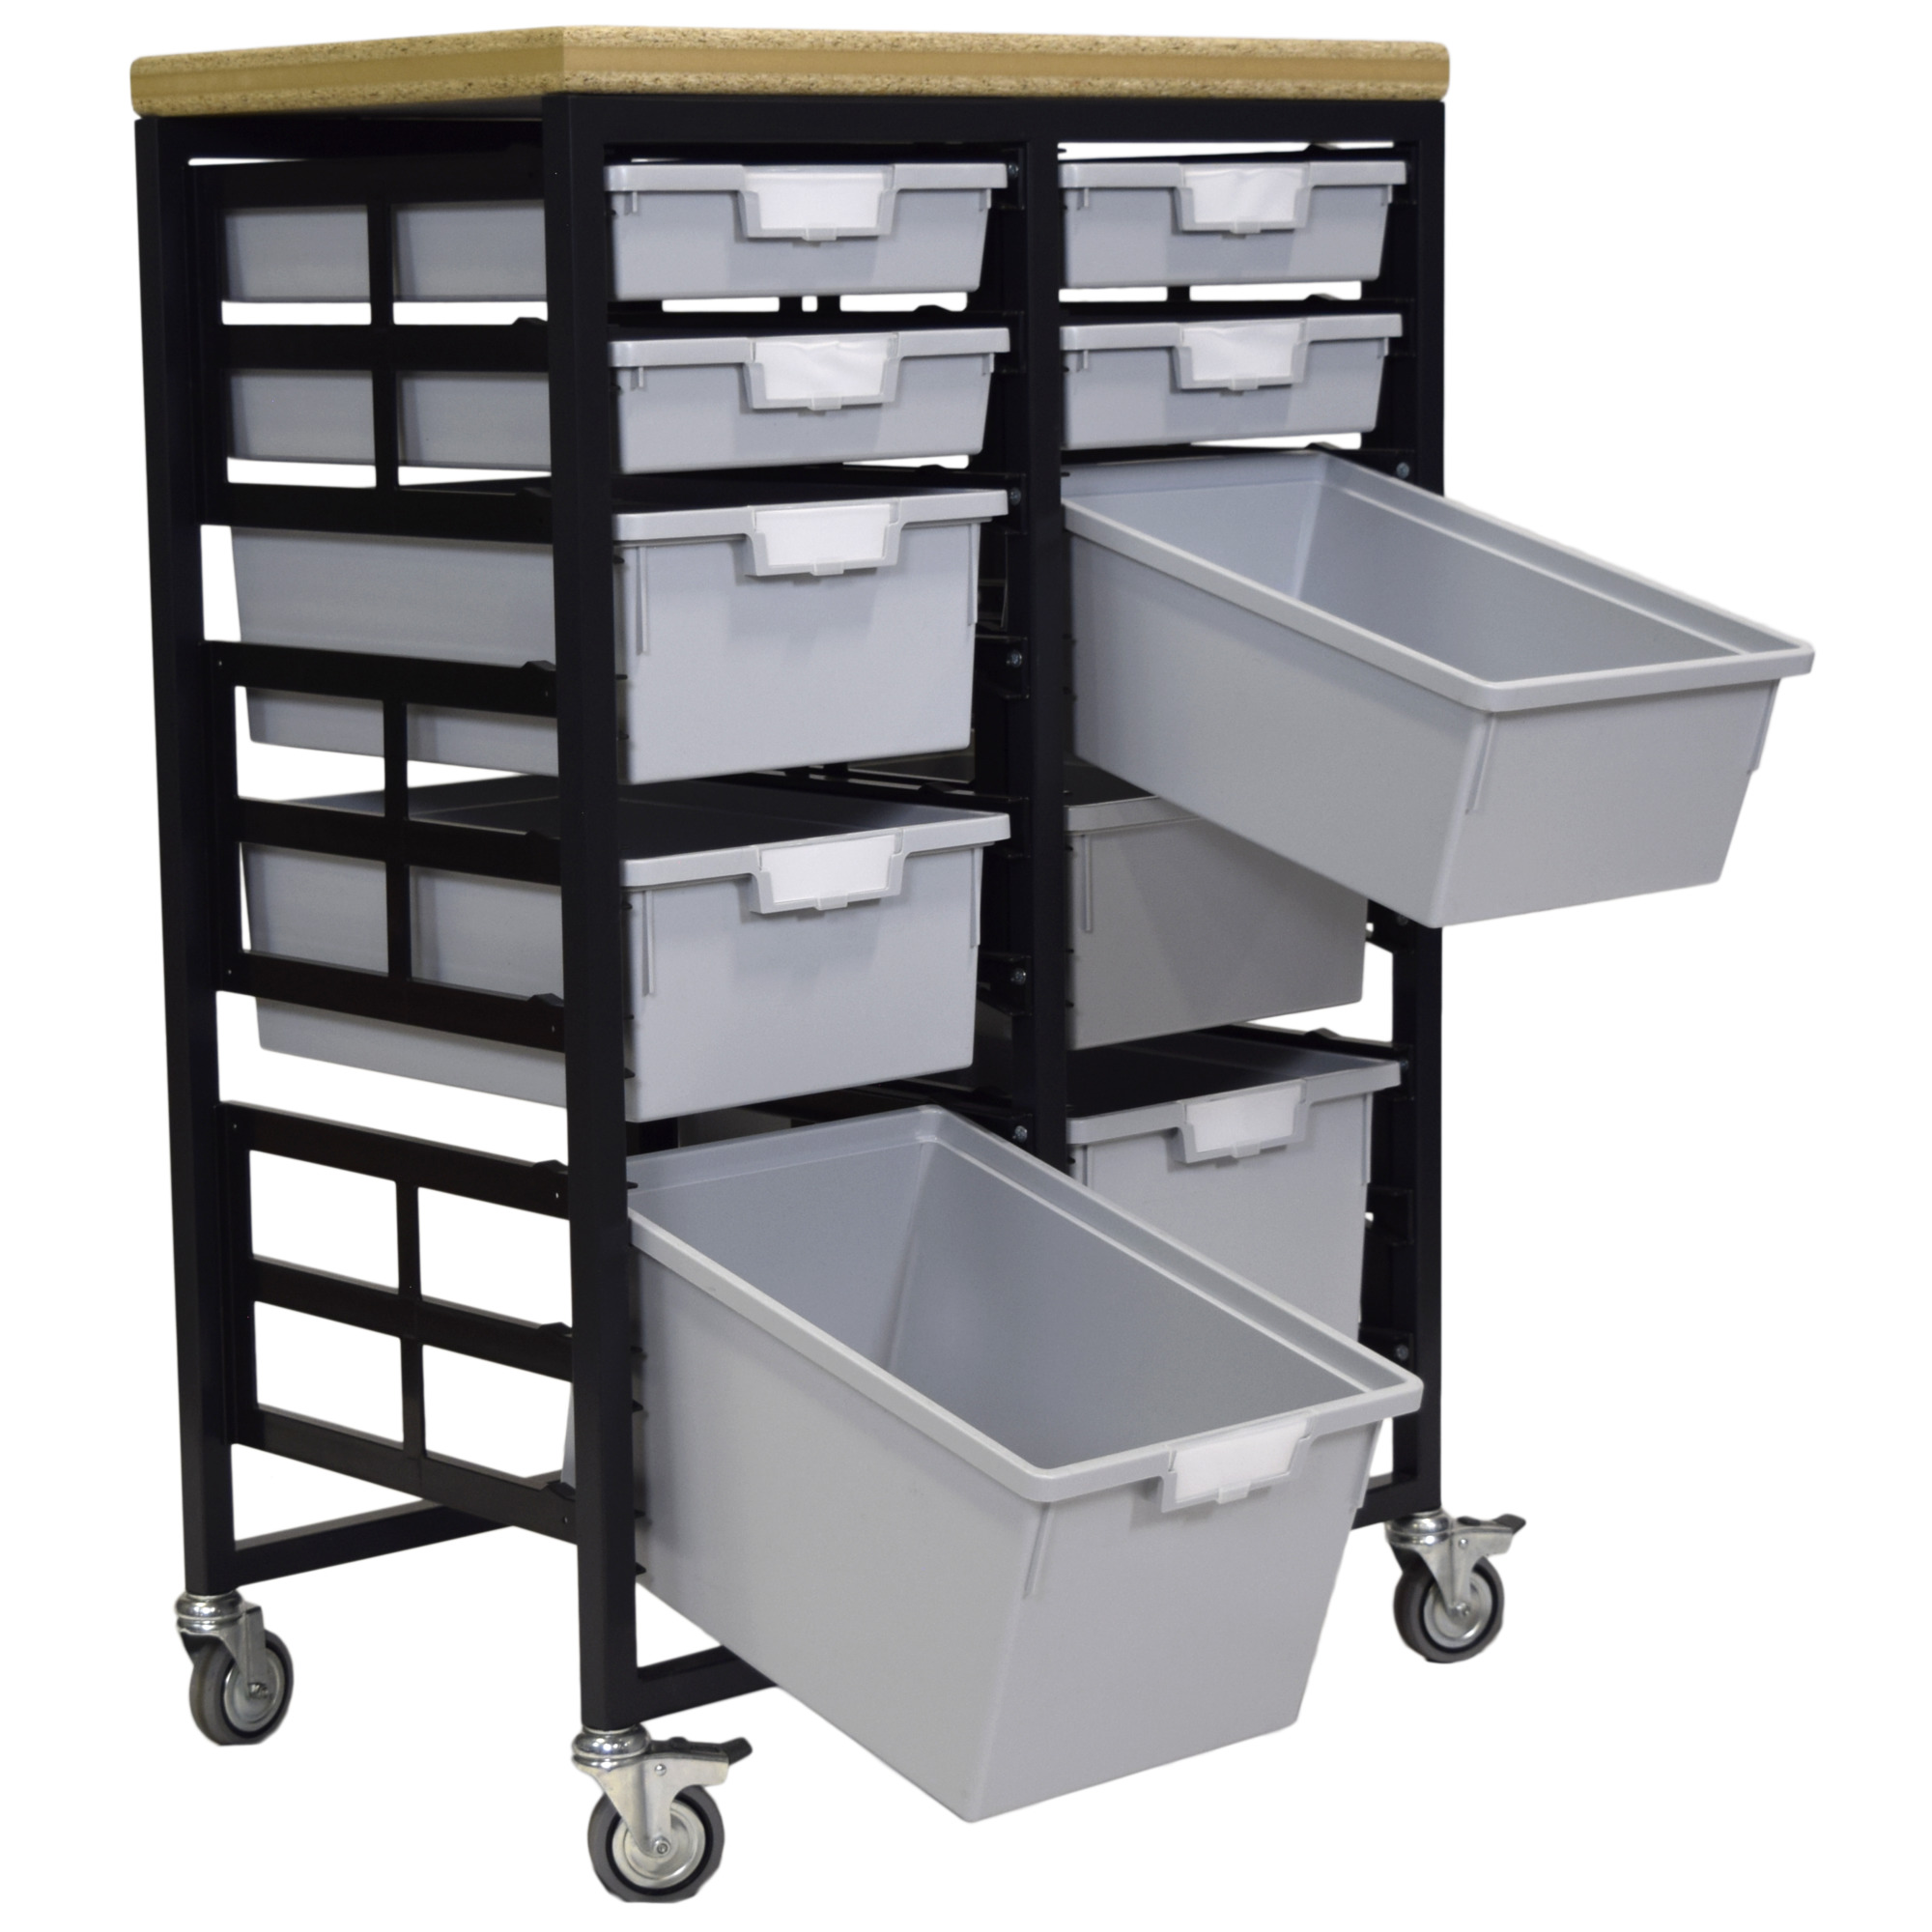 Certwood StorWerks, Mobile Work Station w/Wood Top -10 Trays-Gray, Included (qty.) 10, Material Plastic, Height 12 in, Model CE2102DGGC-4S4D2TLG